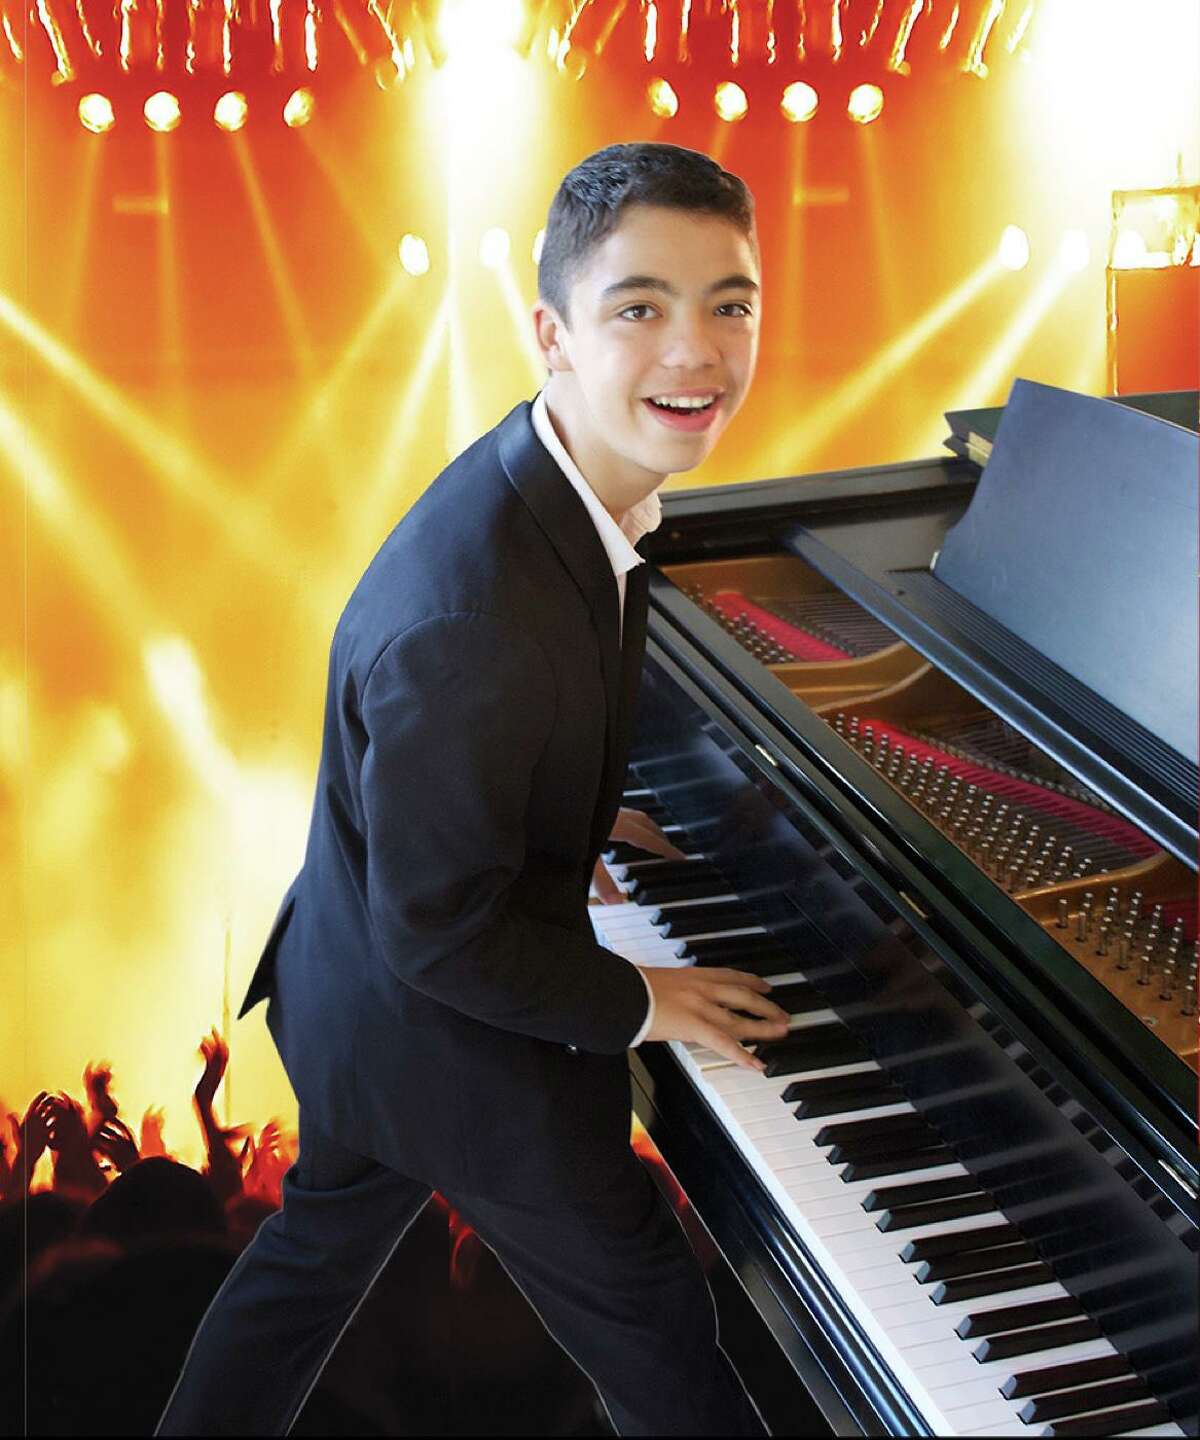 Ethan Bortnick, a 17-year-old global music sensation and Guinness certified as “The World’s Youngest solo musician to headline his own concert tour” is performing with his band at The Bushnell Sunday, Nov. 3.